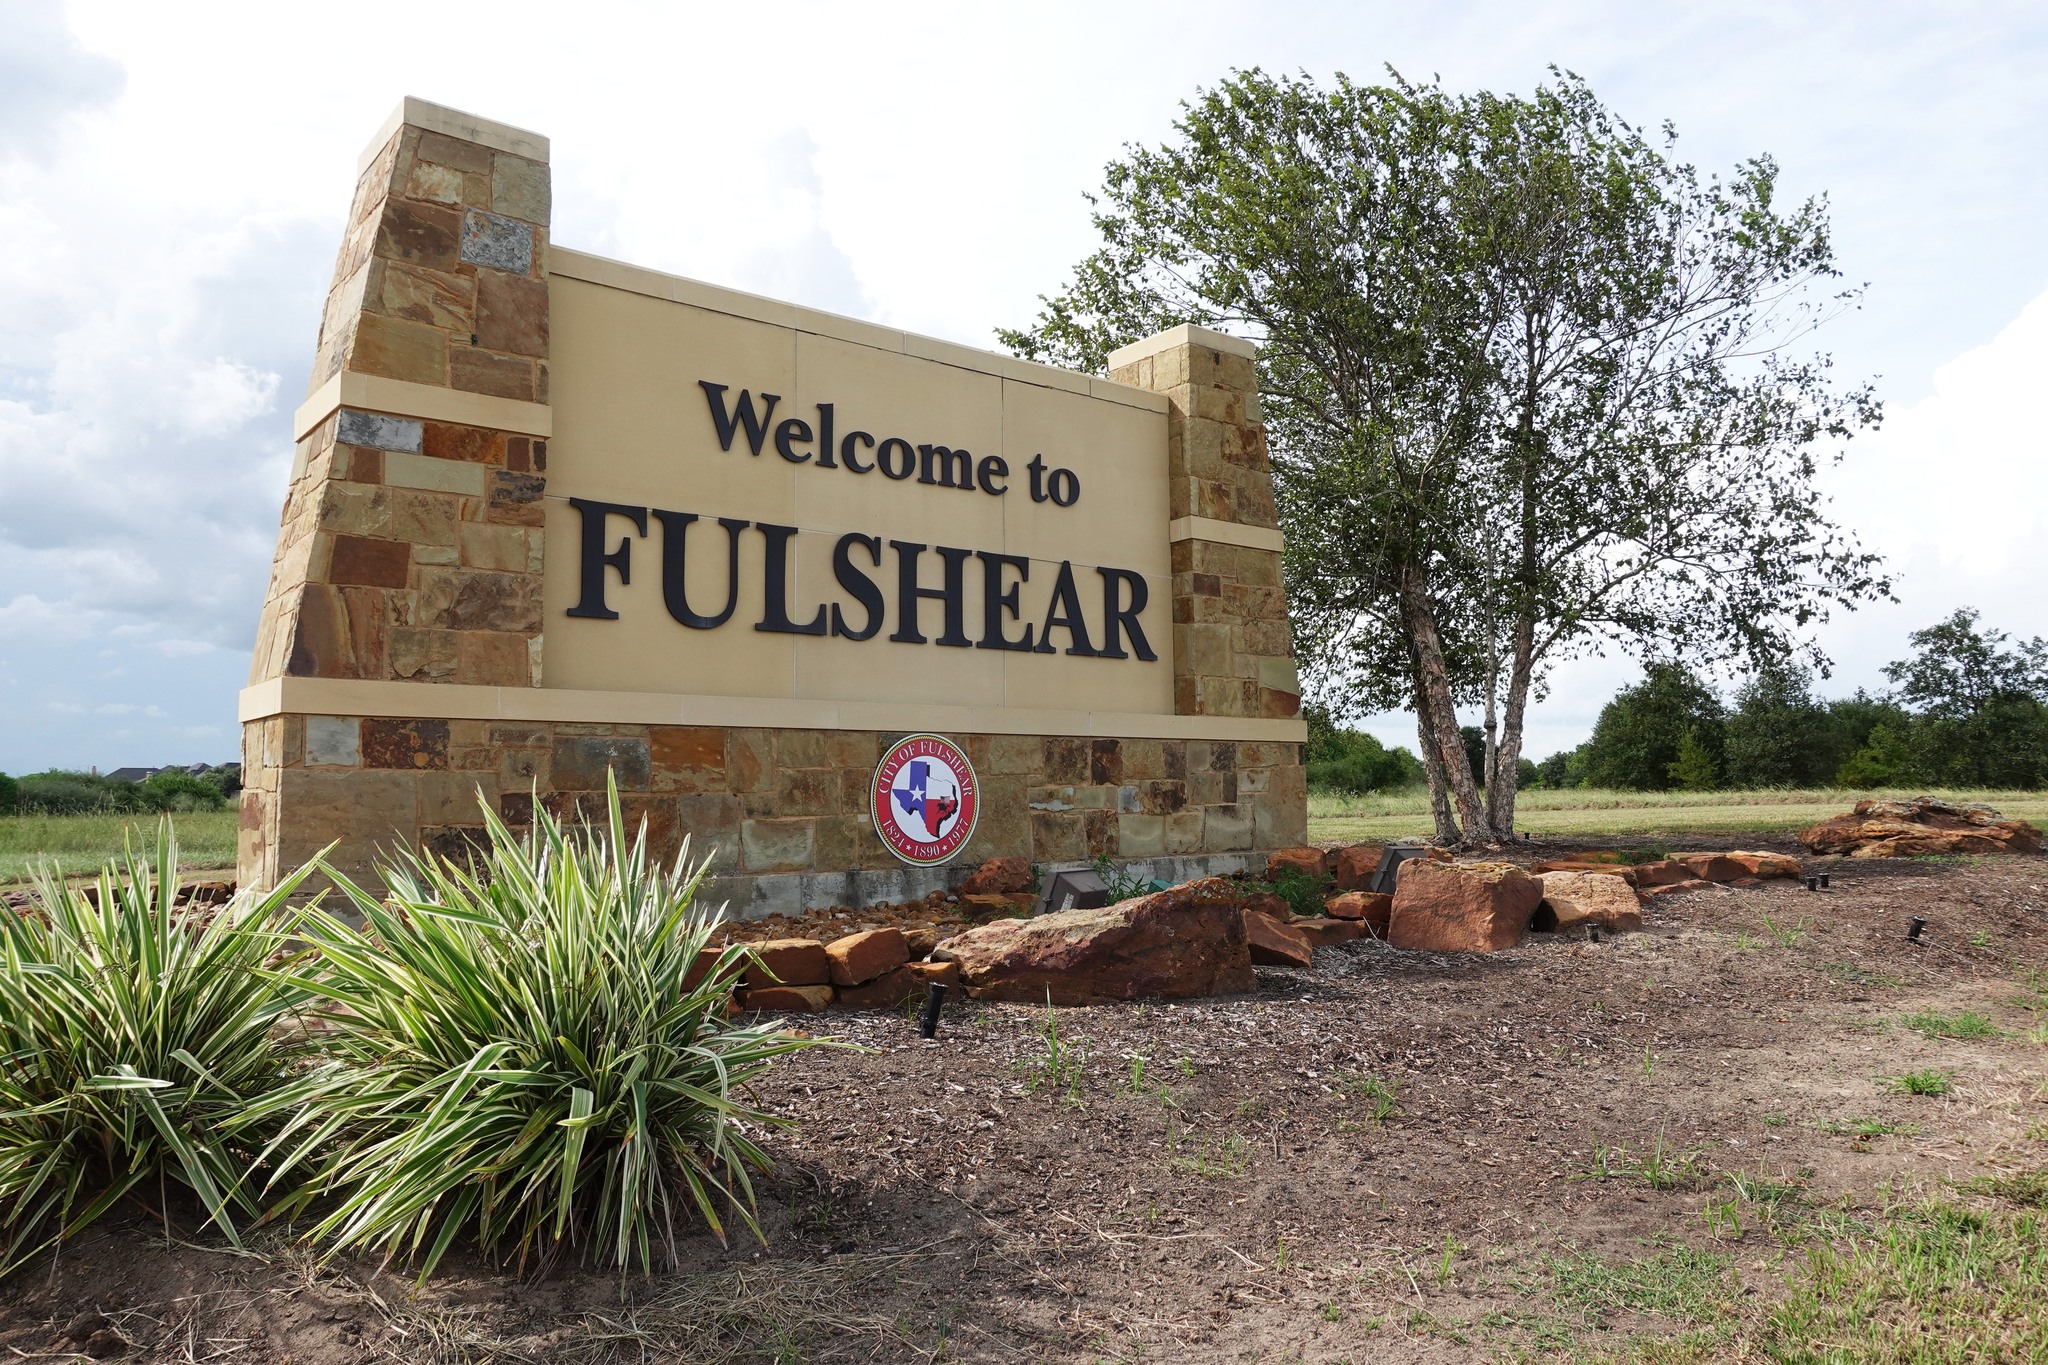 City of Fulshear Seeking Applicants for Boards and Commissions, Application Deadline Extended